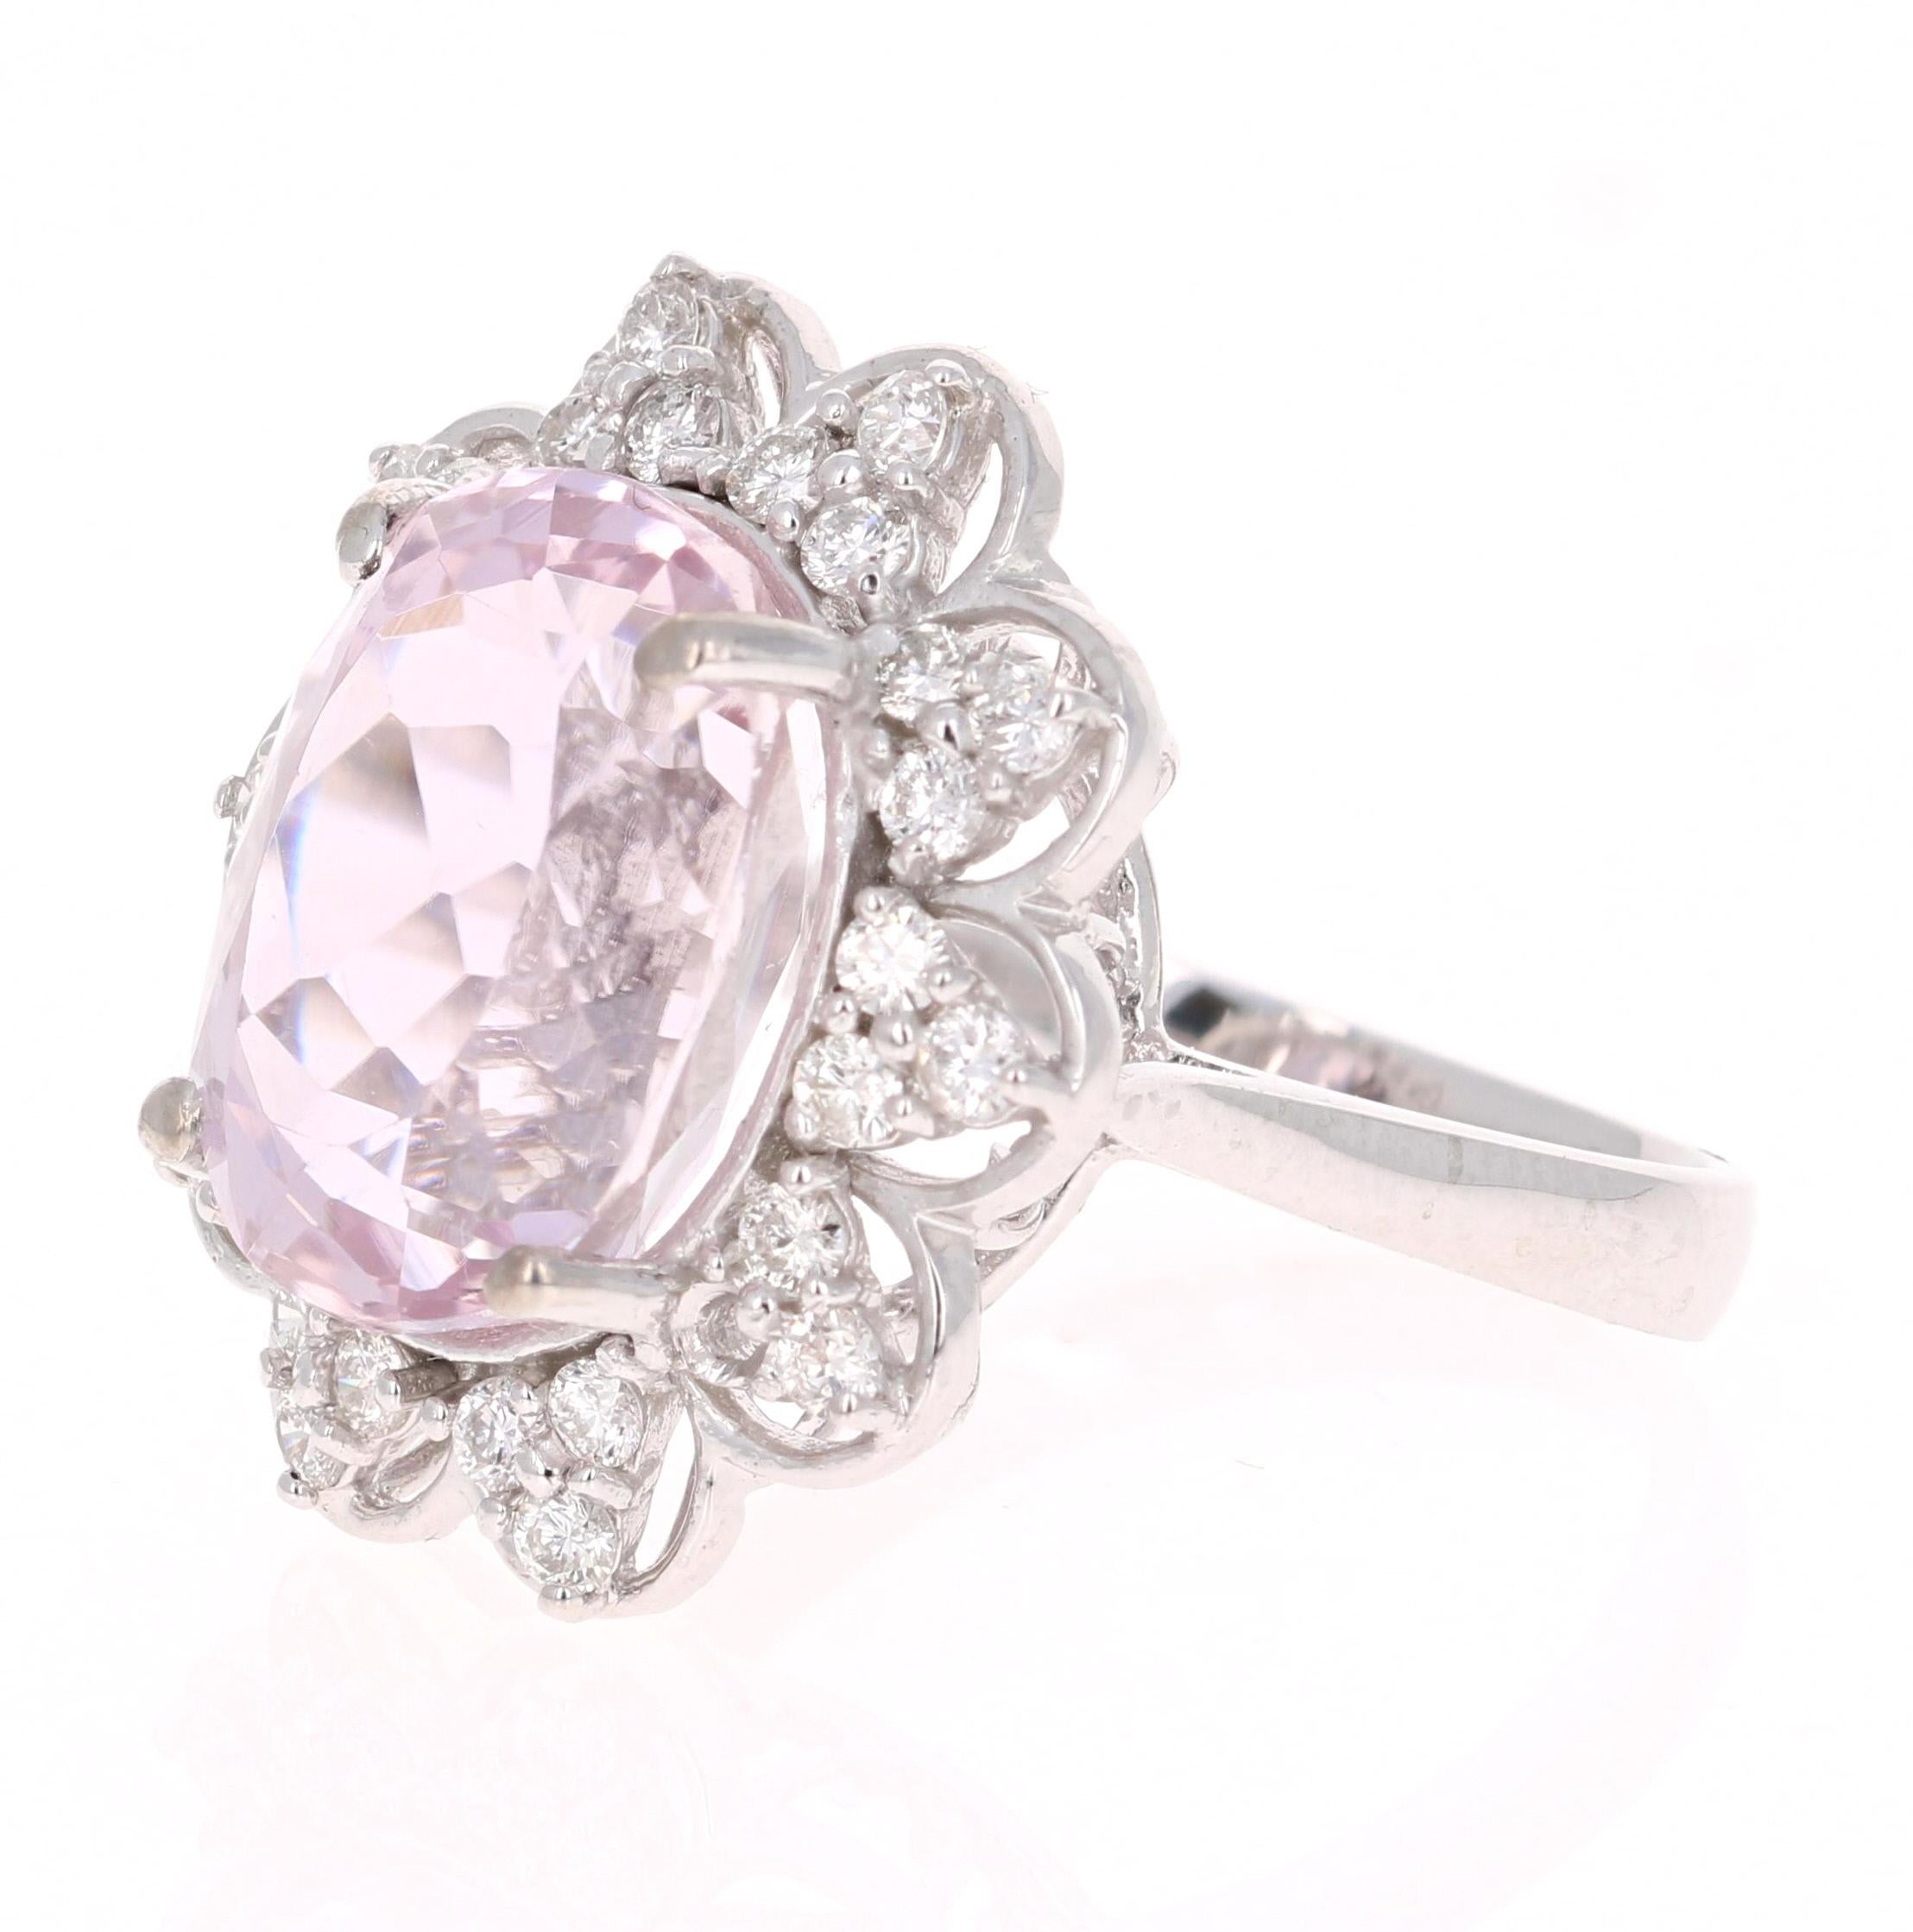 pink kunzite meaning